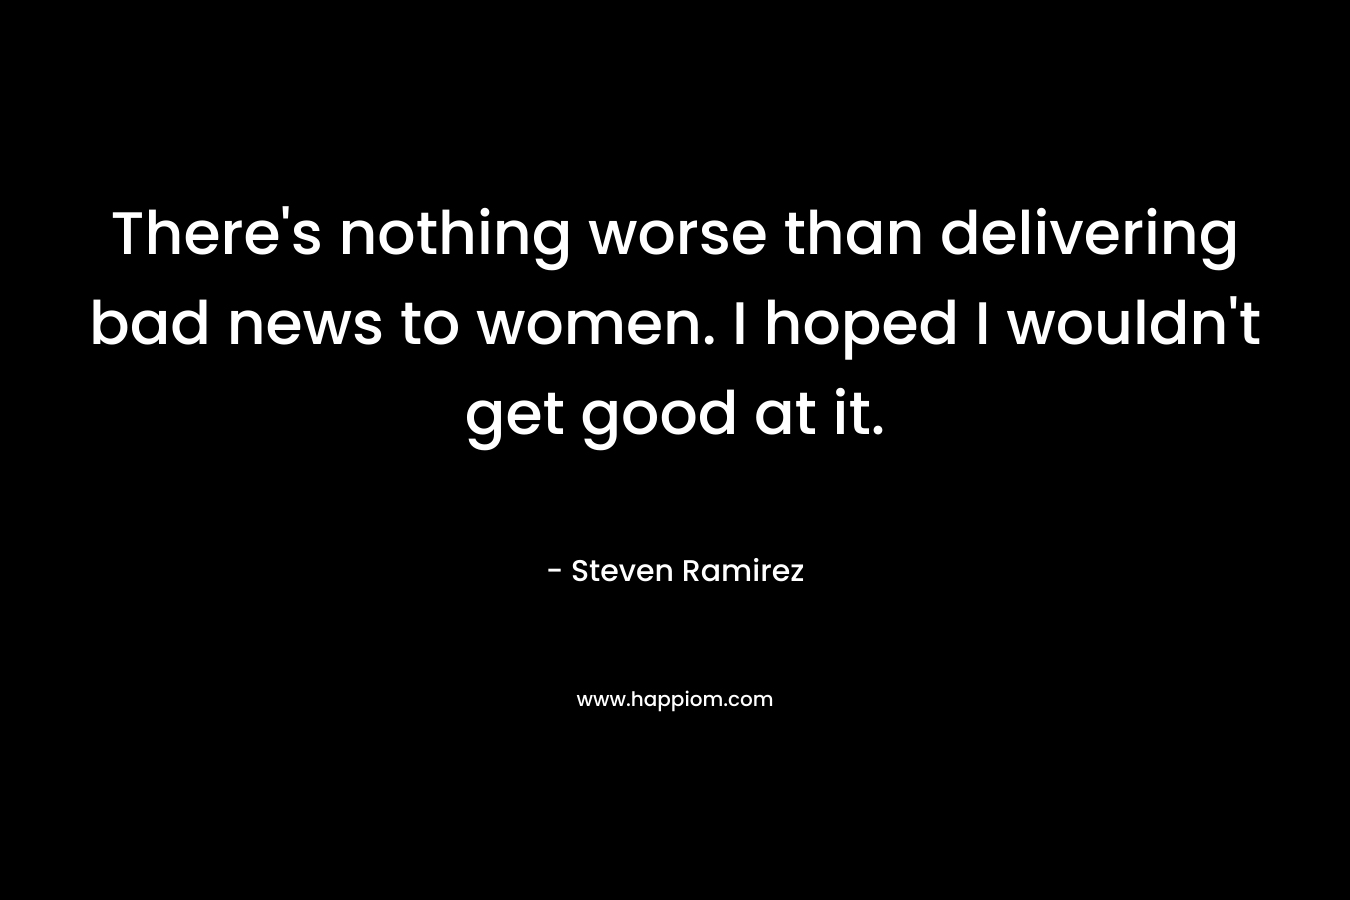 There's nothing worse than delivering bad news to women. I hoped I wouldn't get good at it.